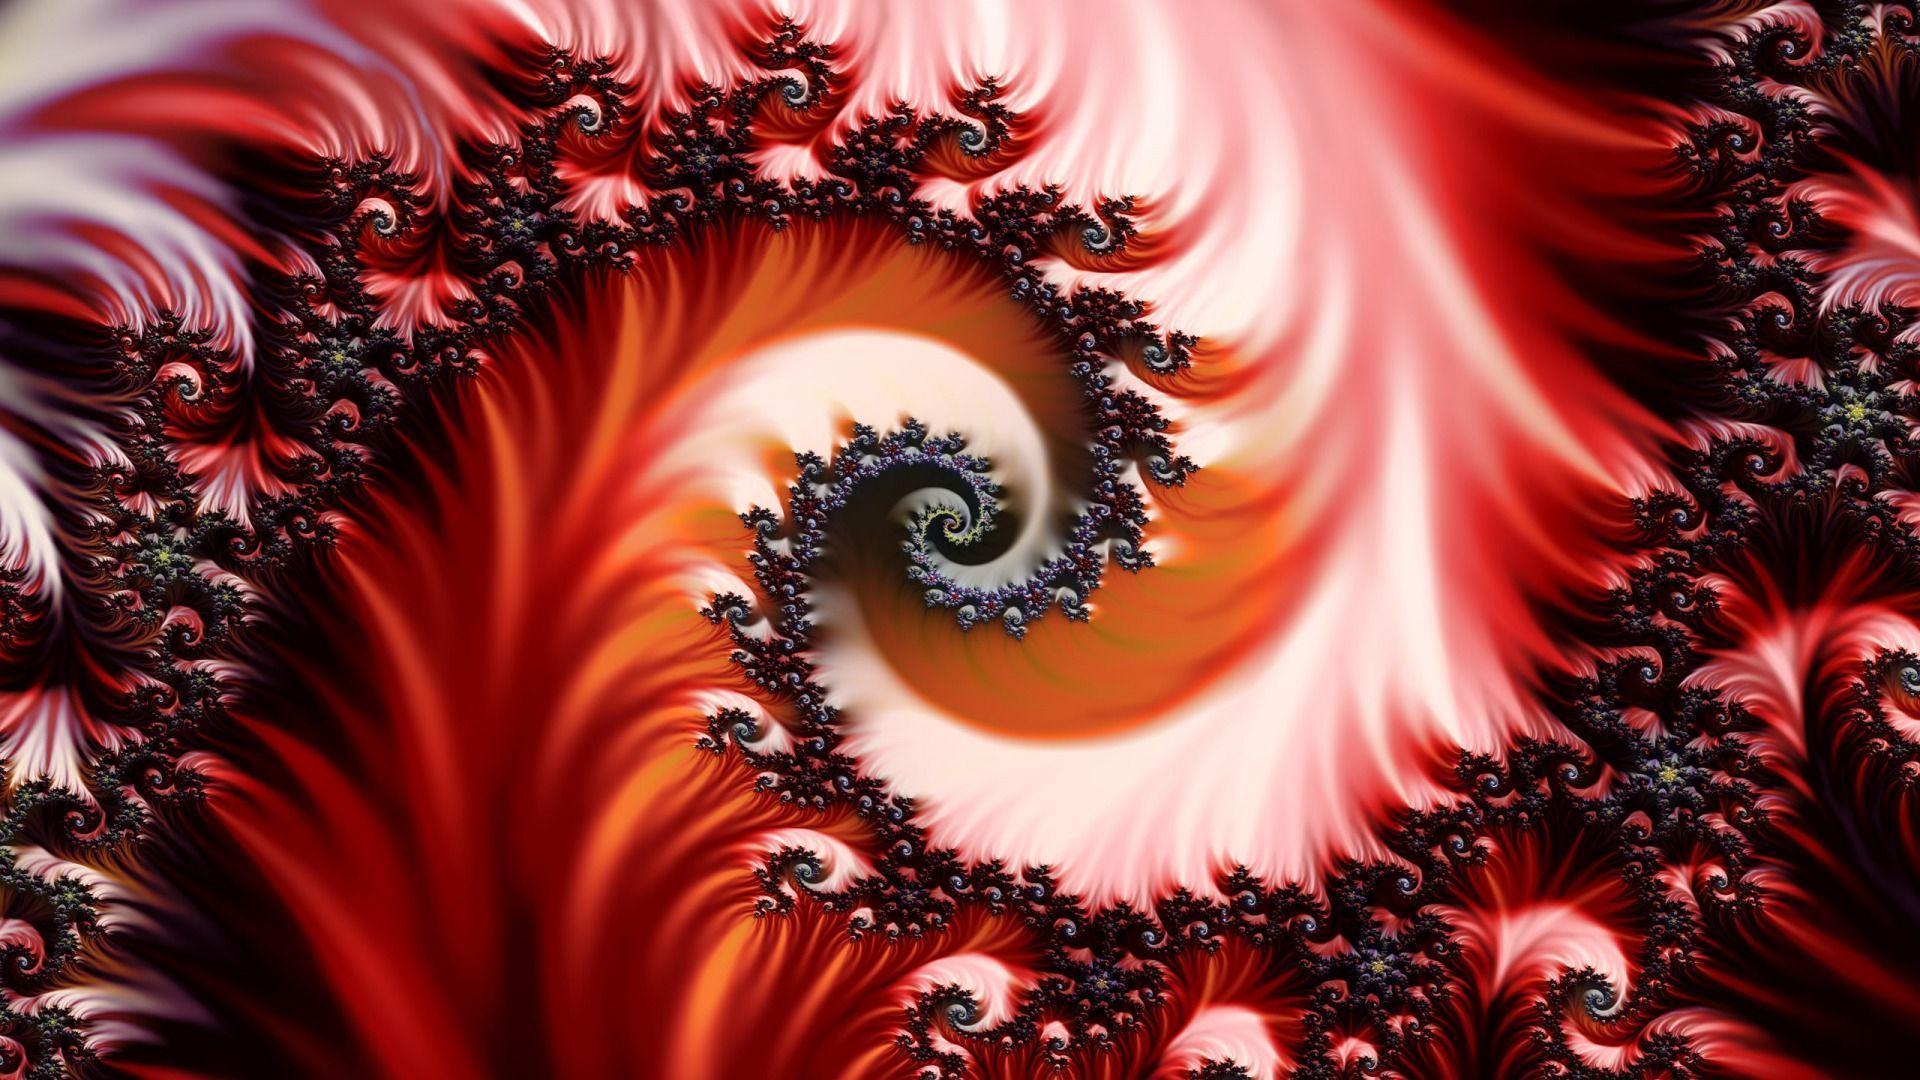 Red Fractal Wallpaper. Daily inspiration art photo, picture